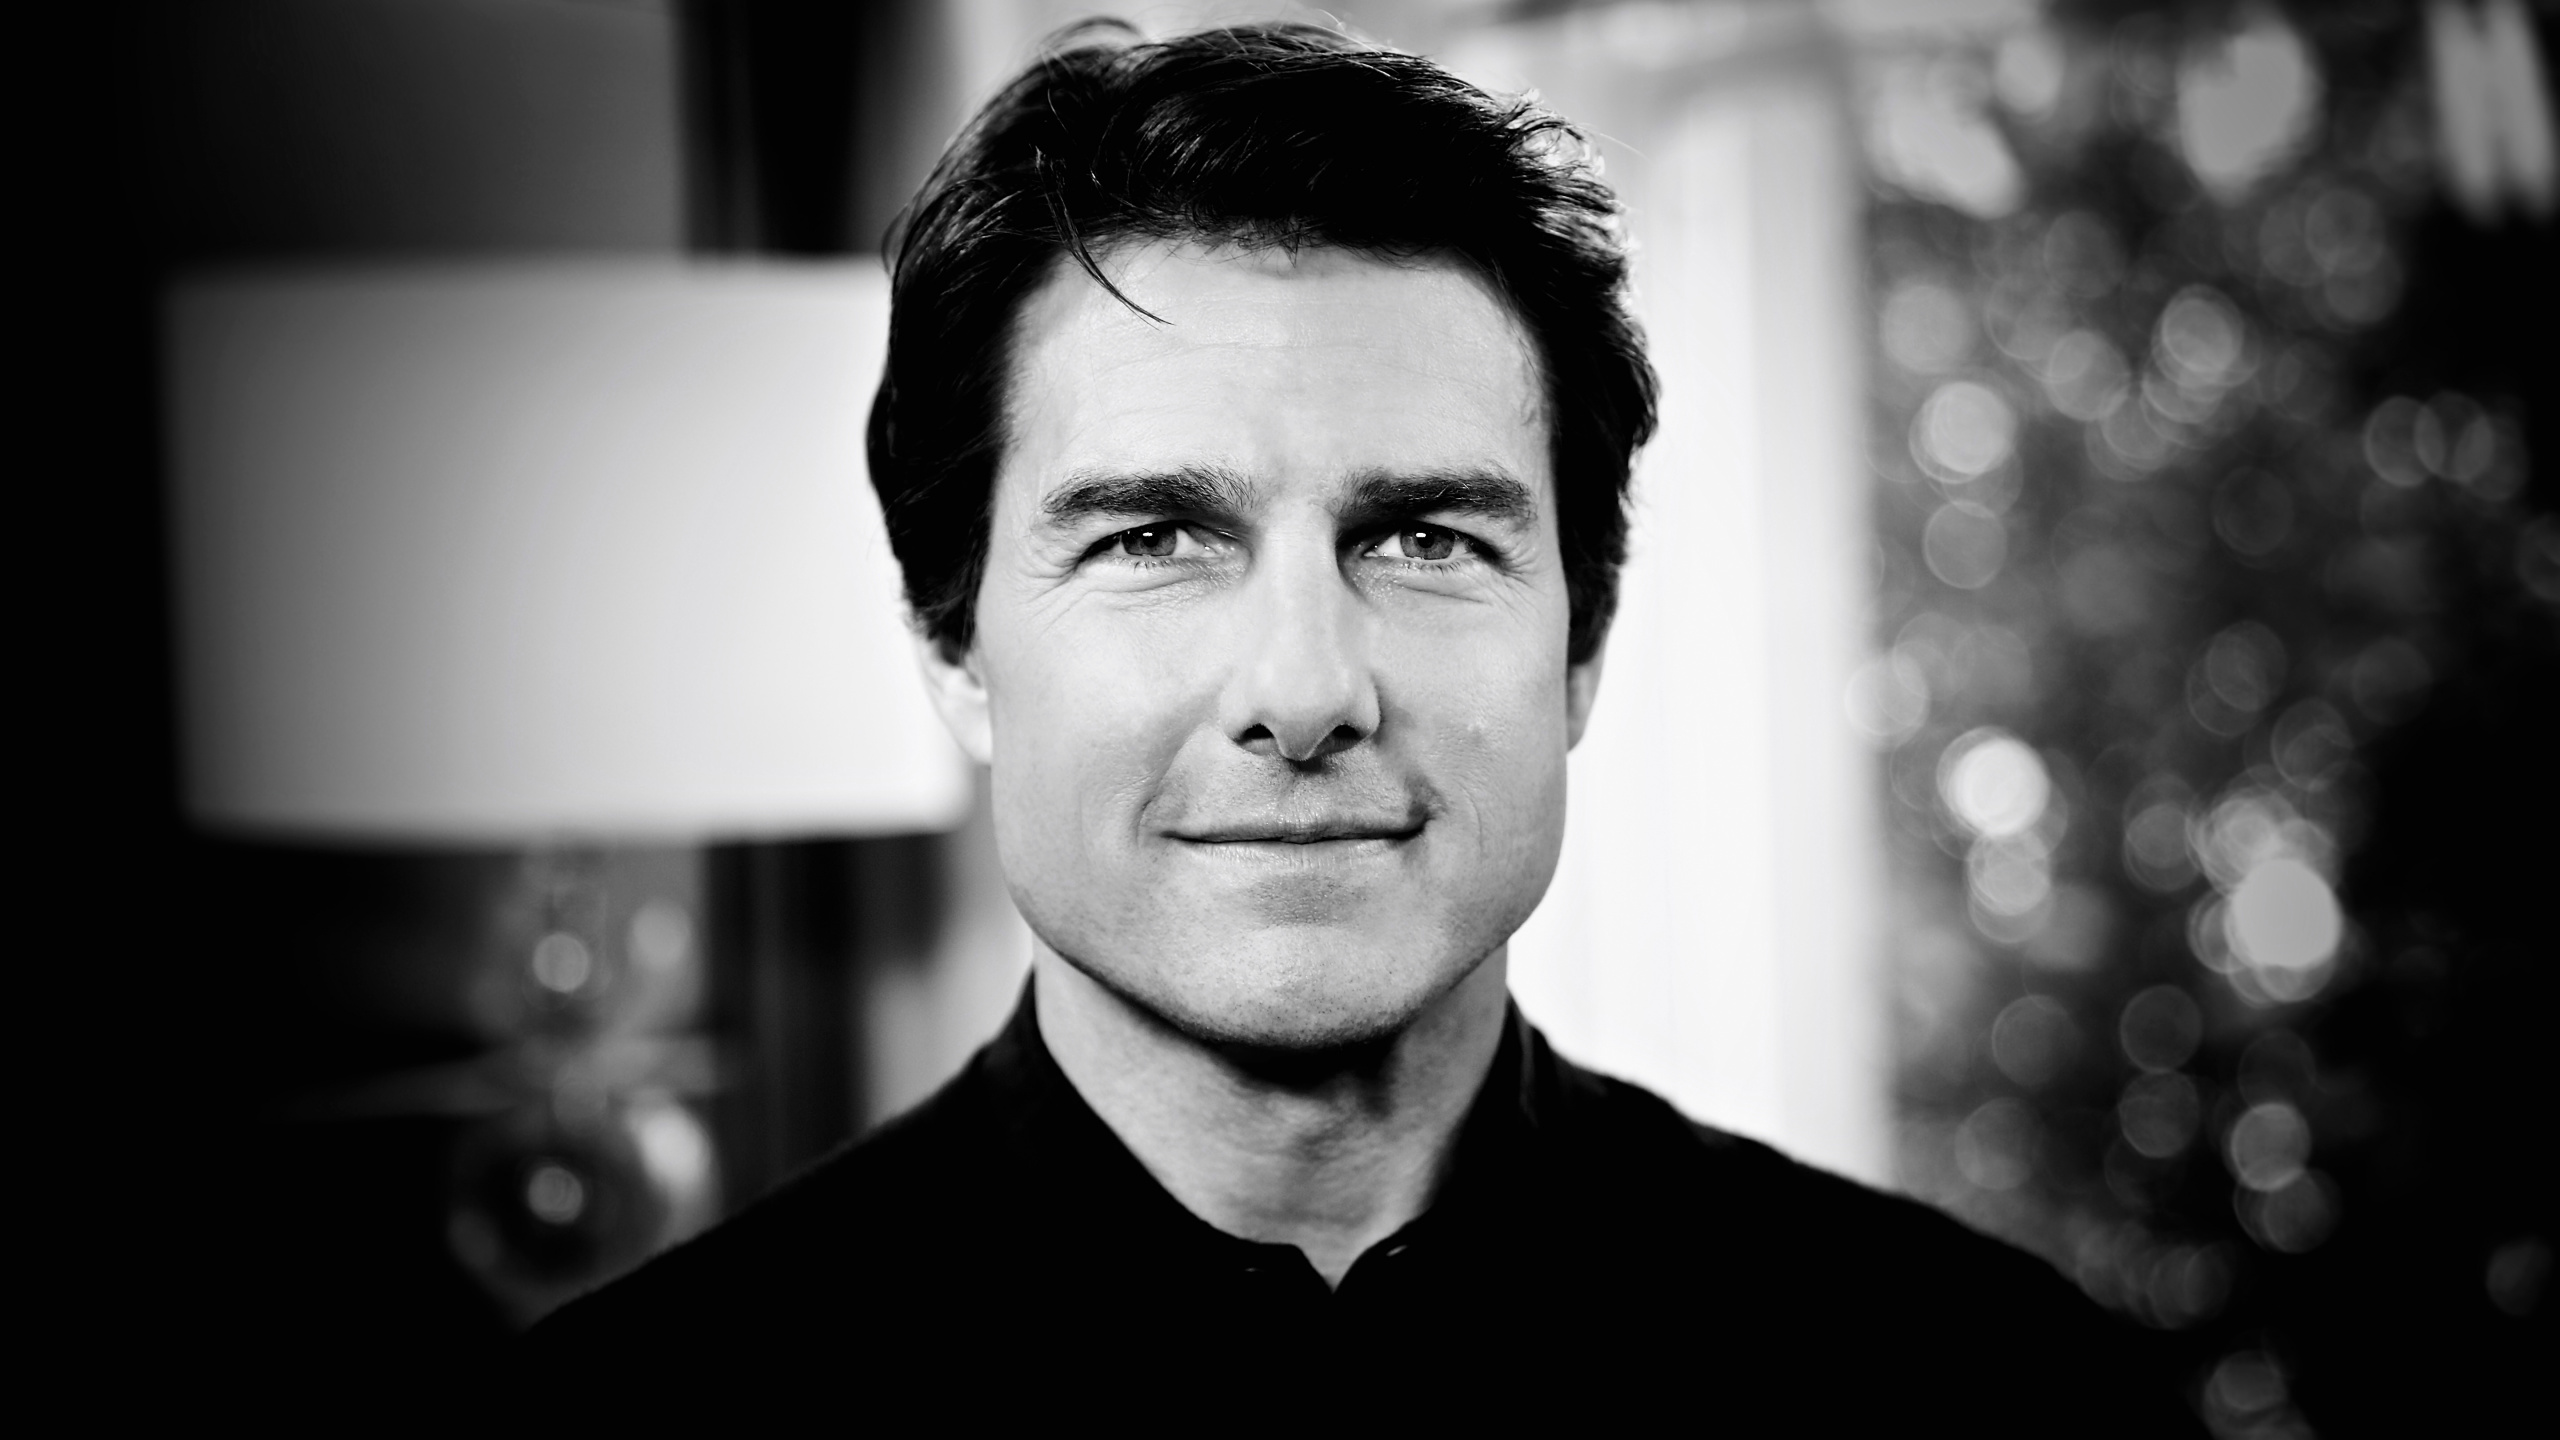 Tom Cruise, Black and White, Portrait, Face, Chin. Wallpaper in 2560x1440 Resolution